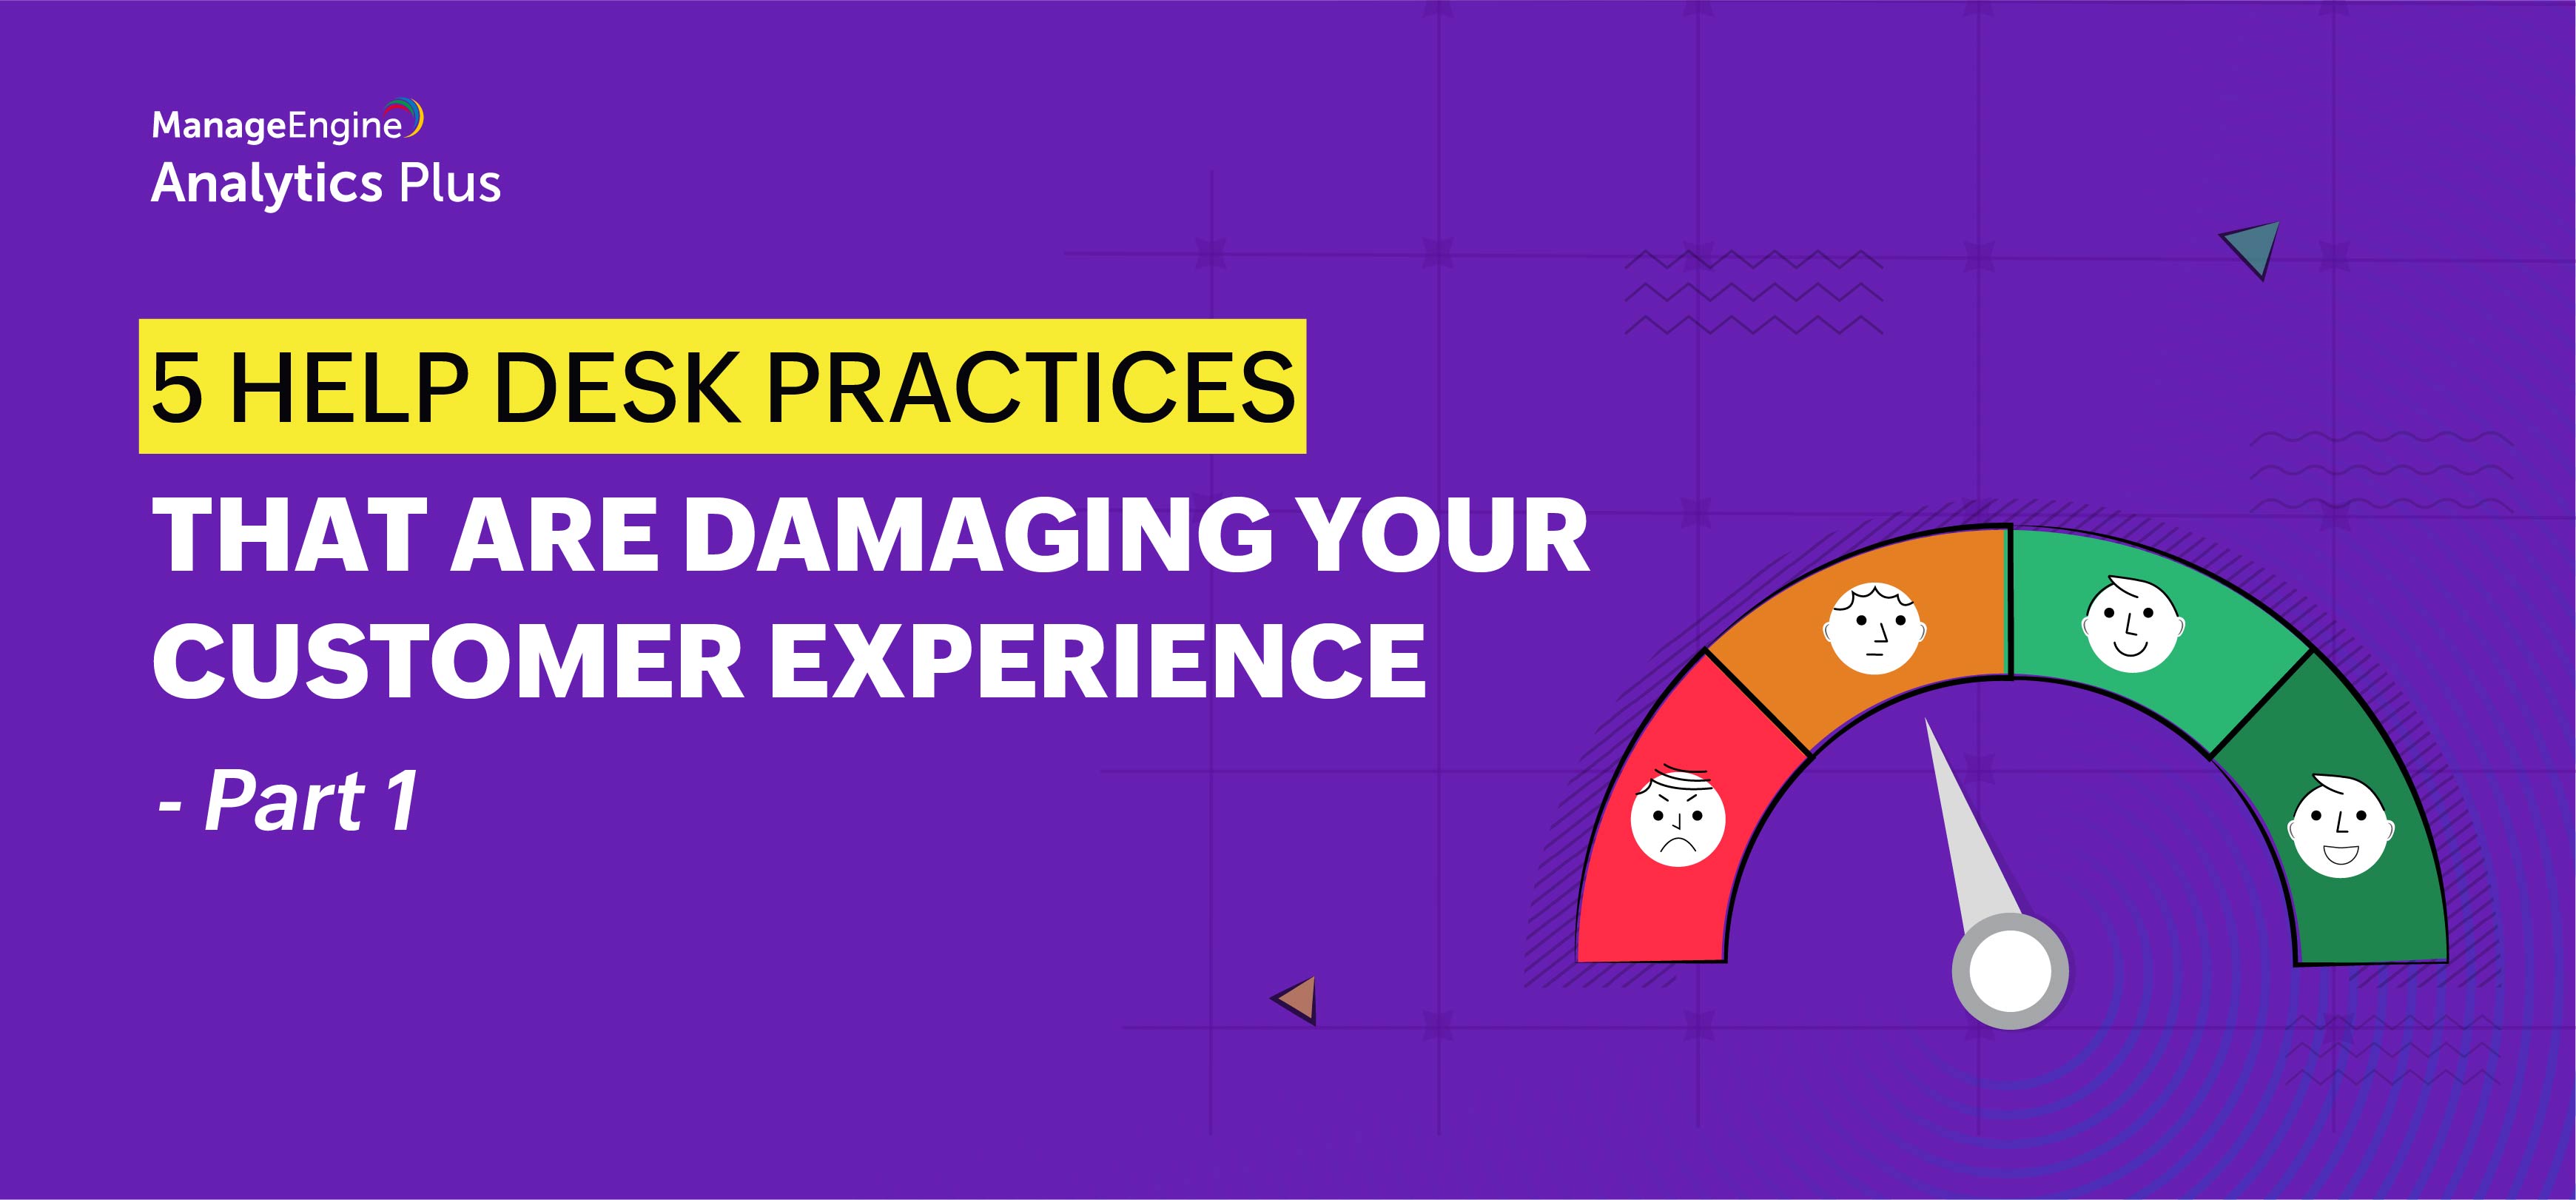 5 help desk practices that are damaging your customer experience—Part 1